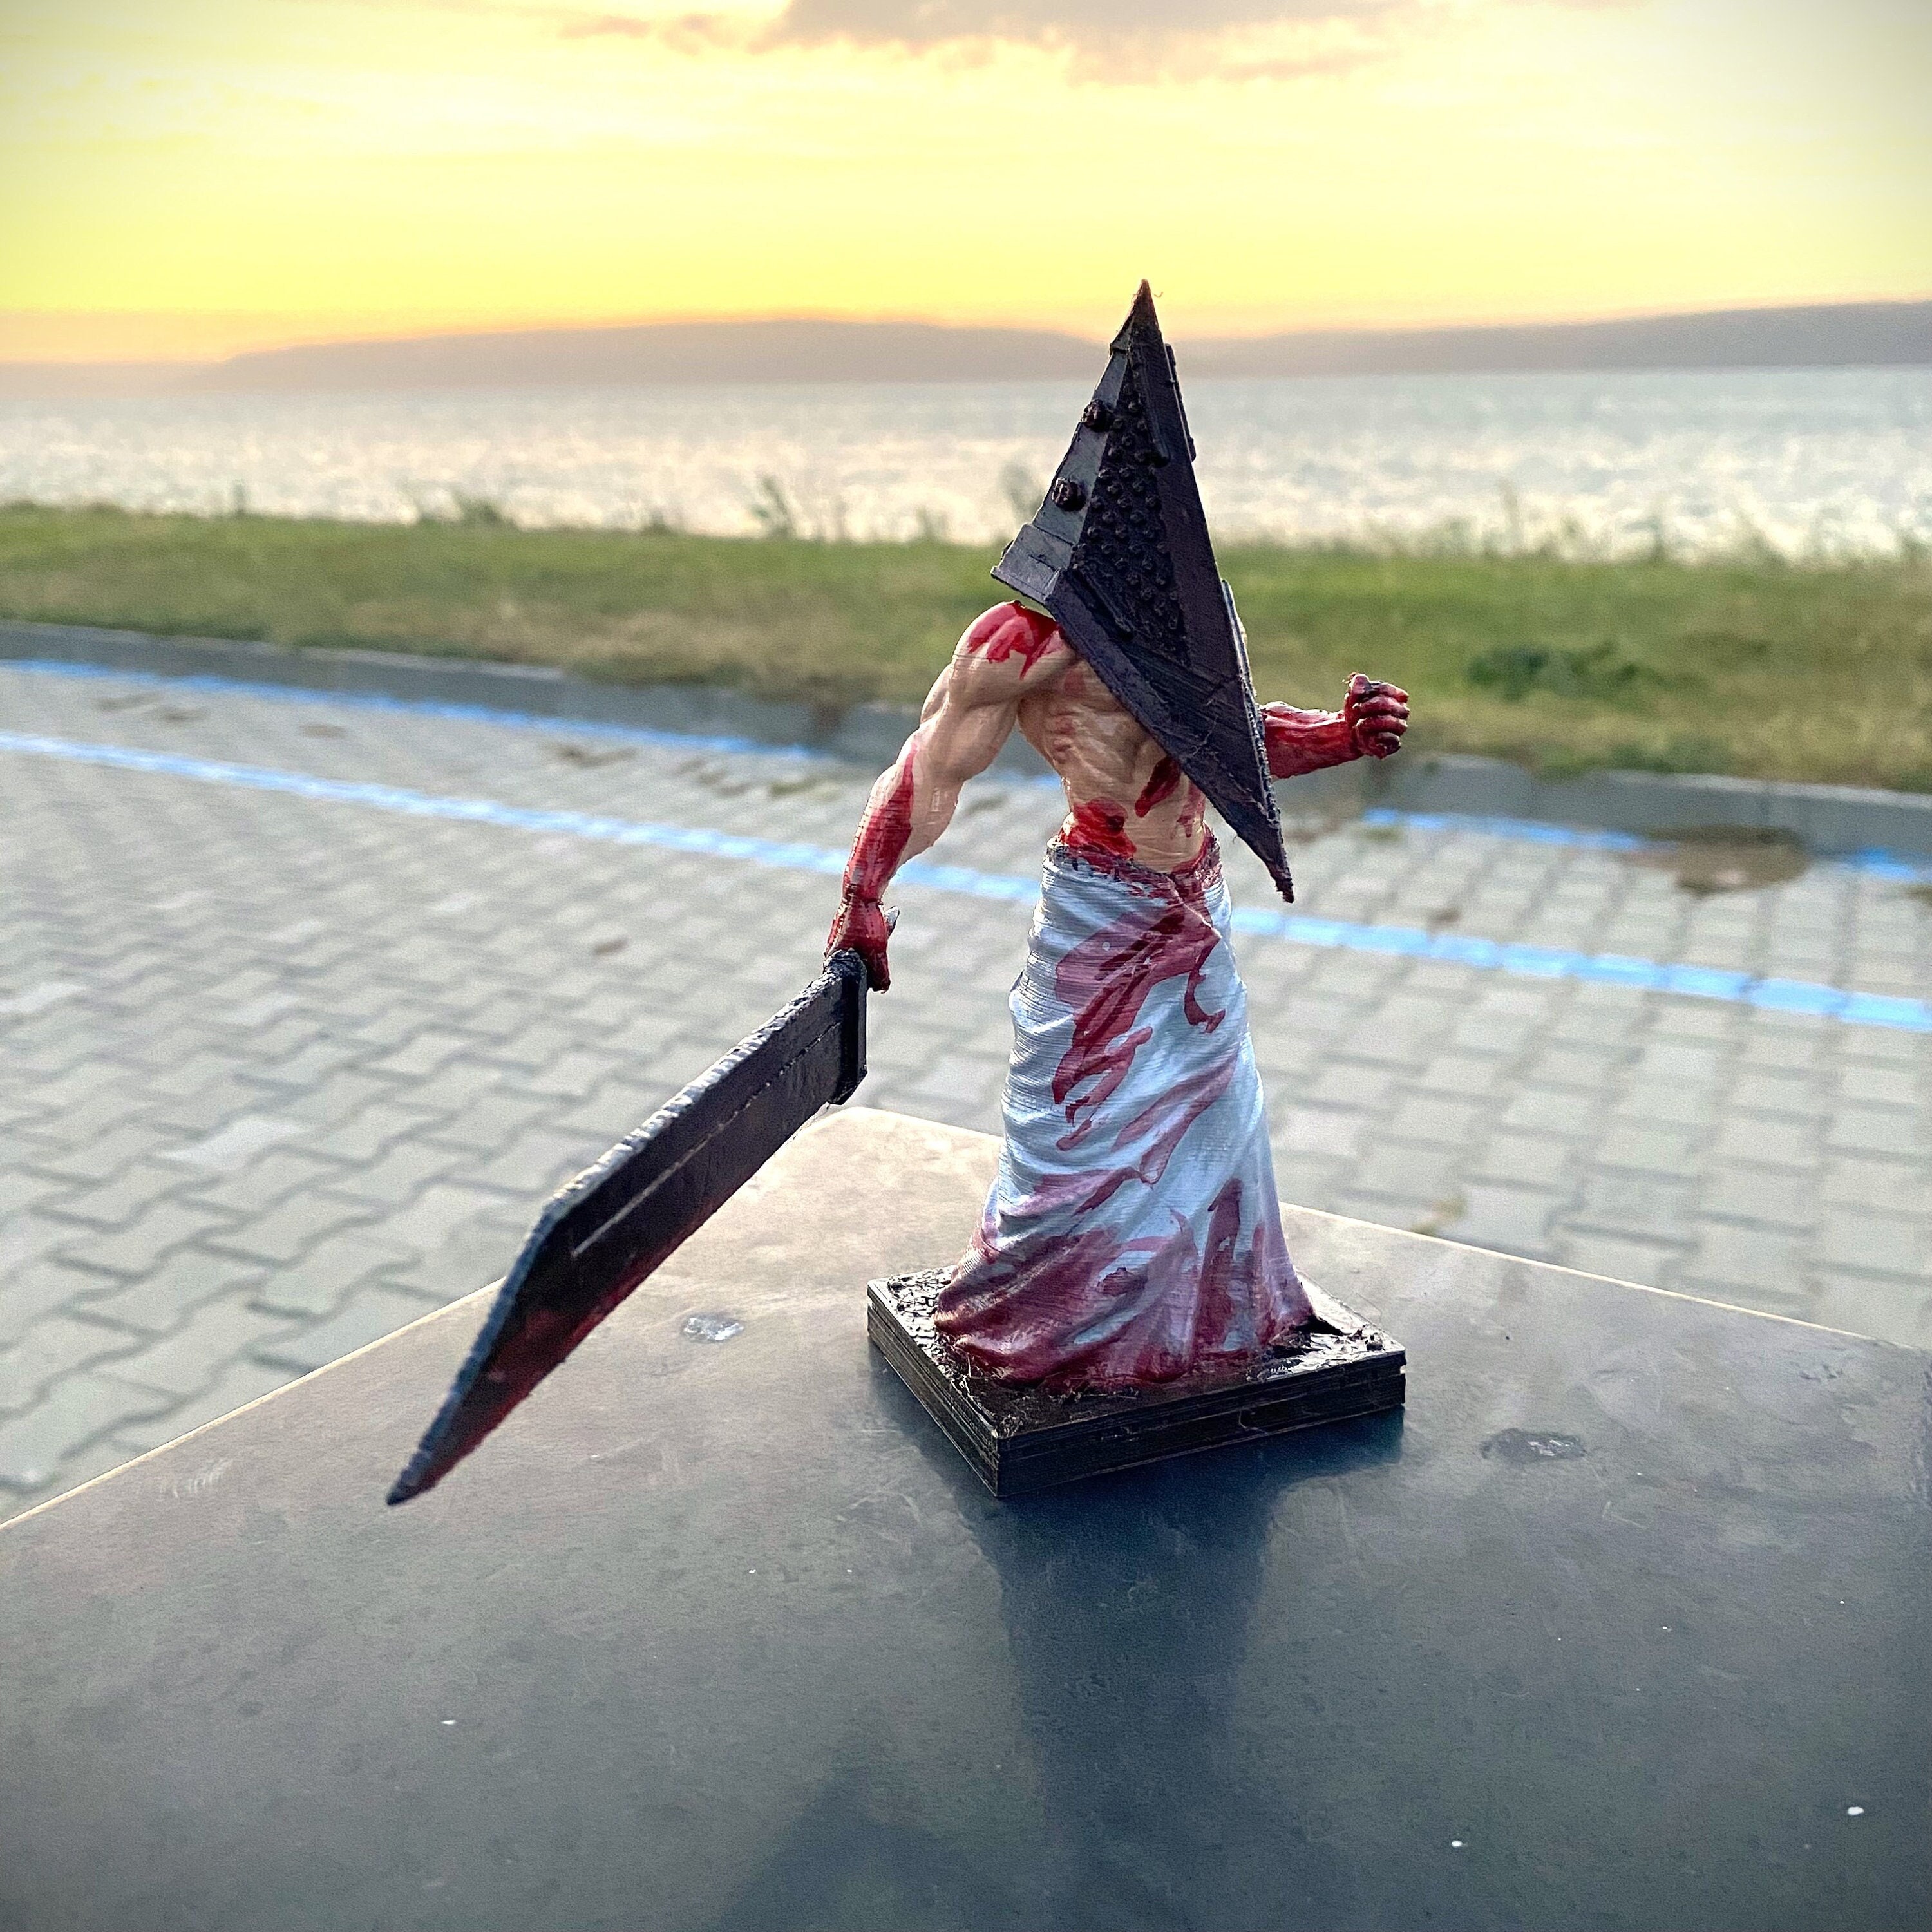 Pyramid Head & Silent Hill Collectibles